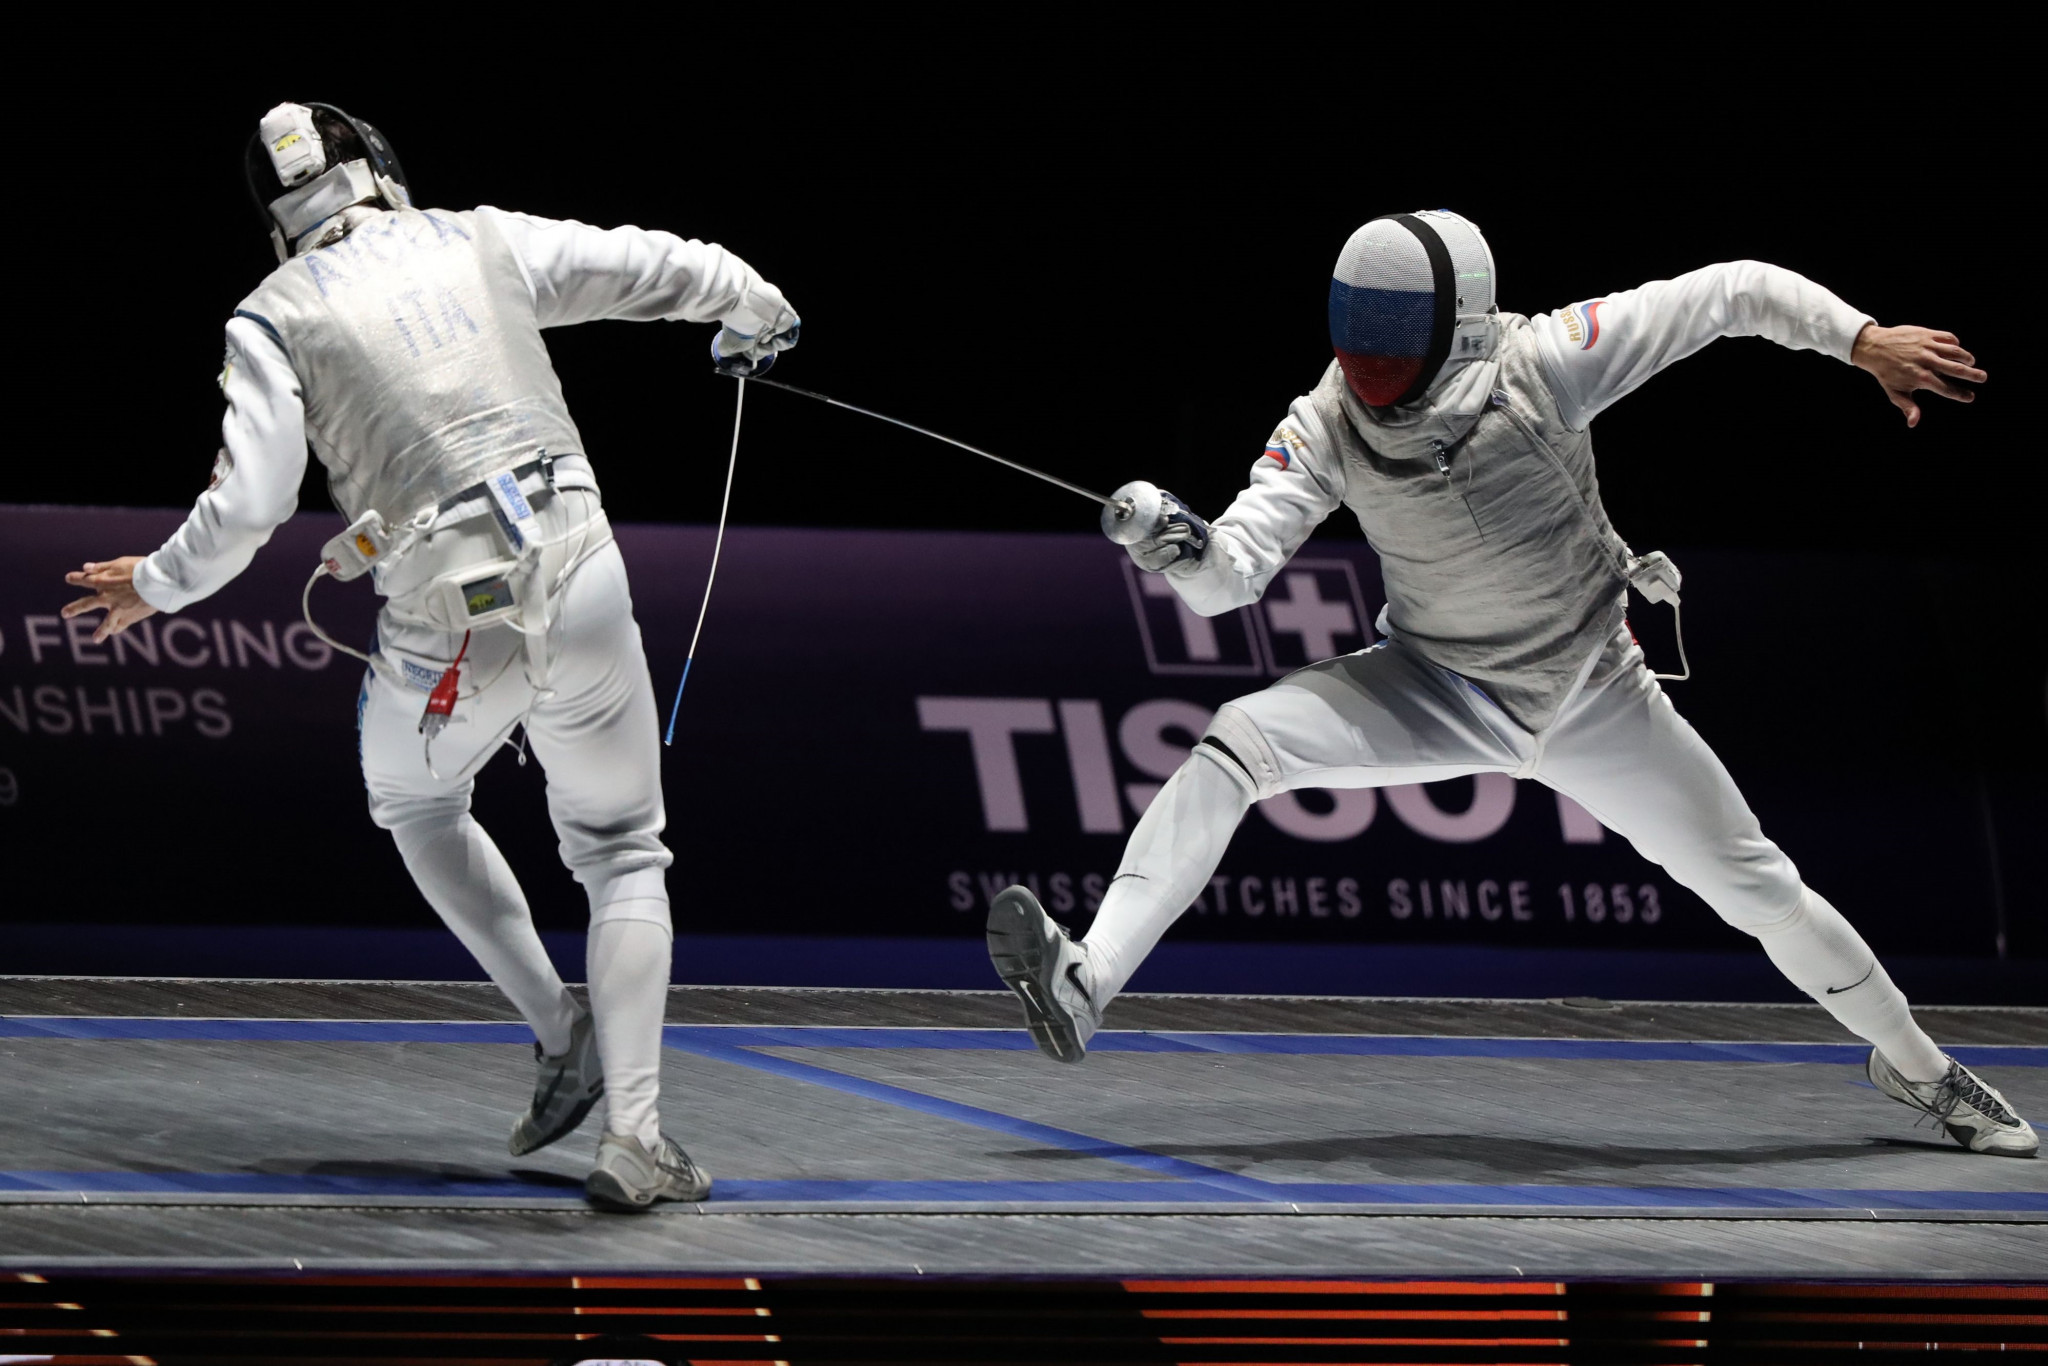 Russian fencers have been banned from international competition since March ©Getty Images